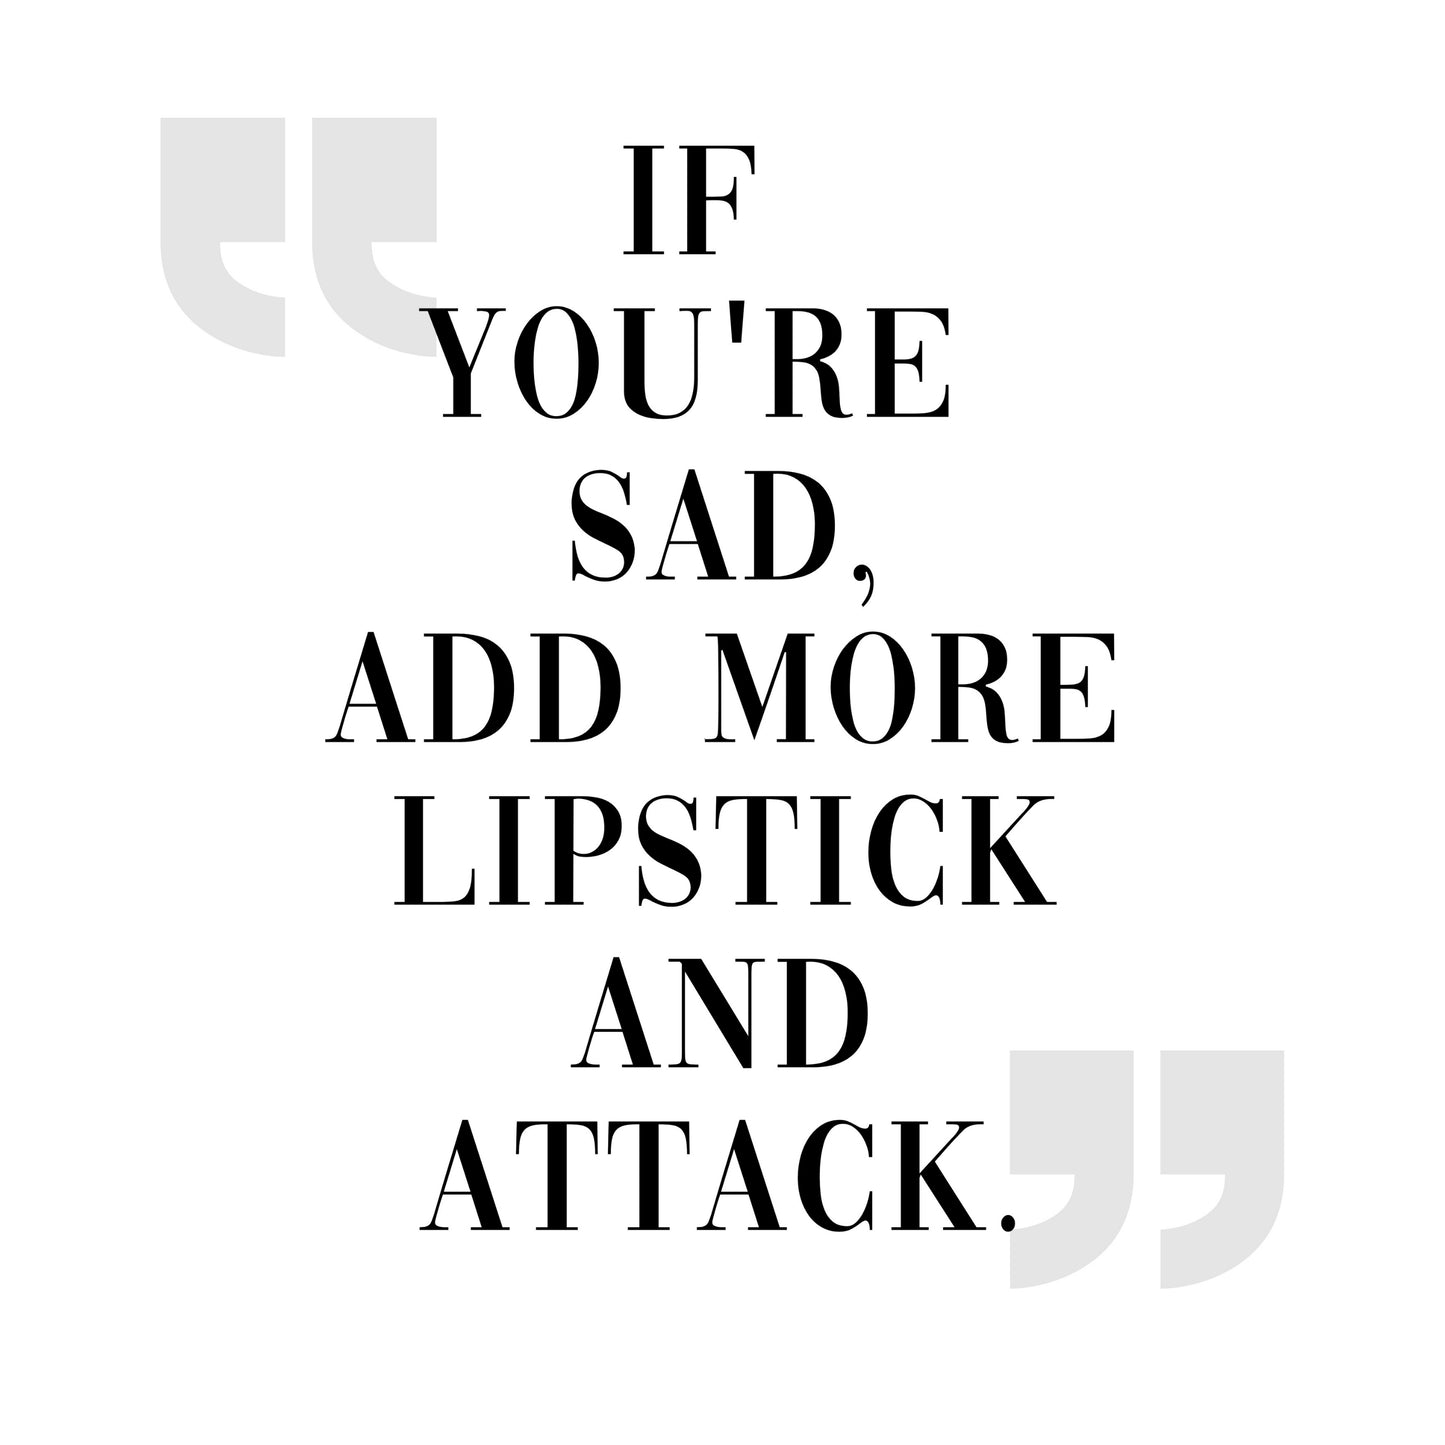 "If You're Sad Add More Lipstick And Attack" Famous Quote by Coco Chanel, Printable Art